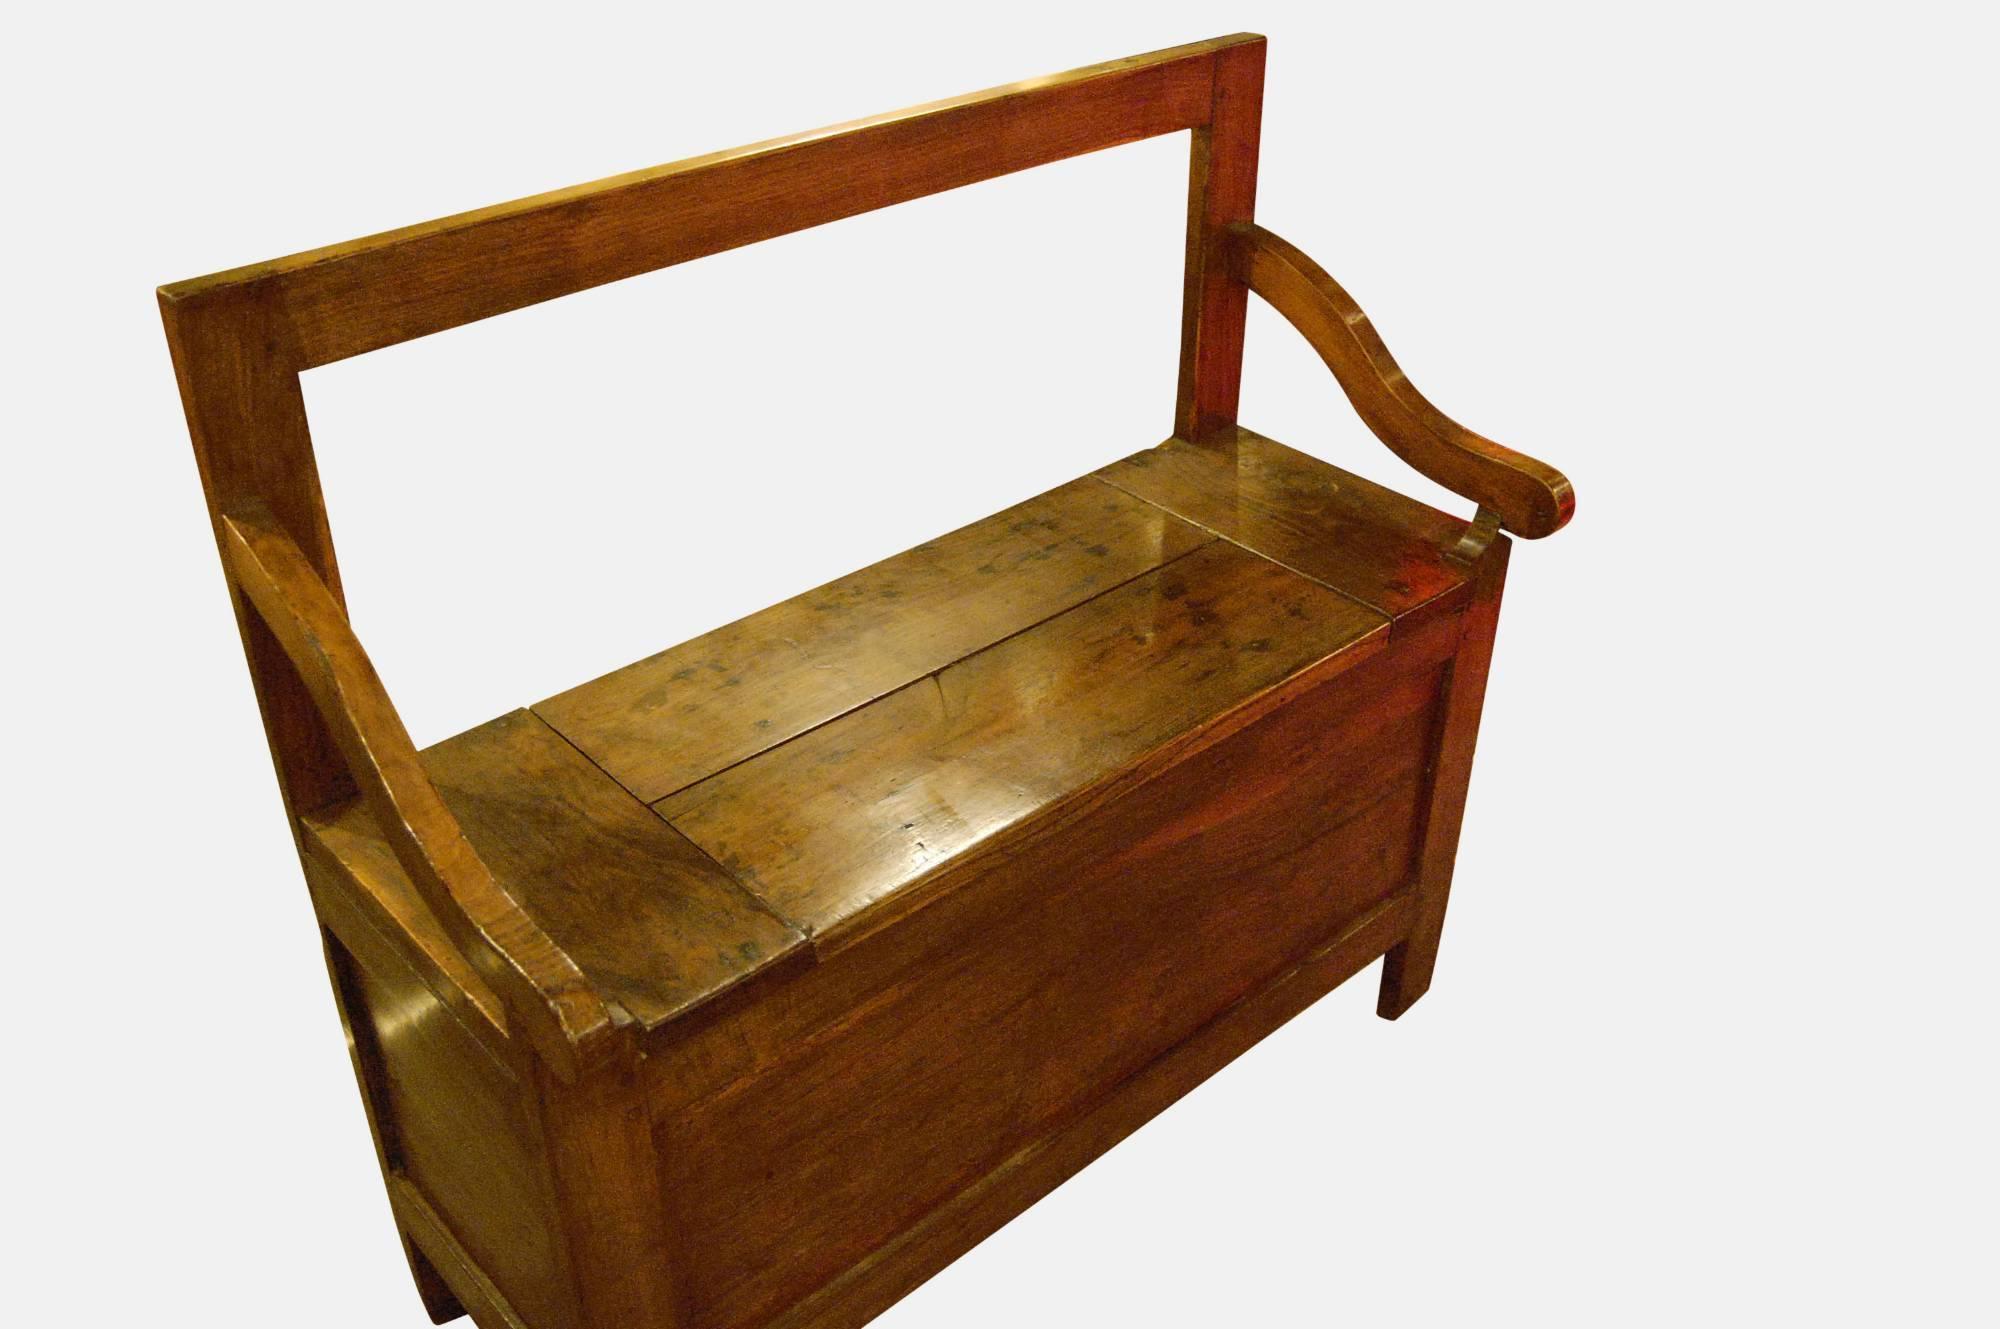 French chestnut bench with lifting seat,
circa 1890.